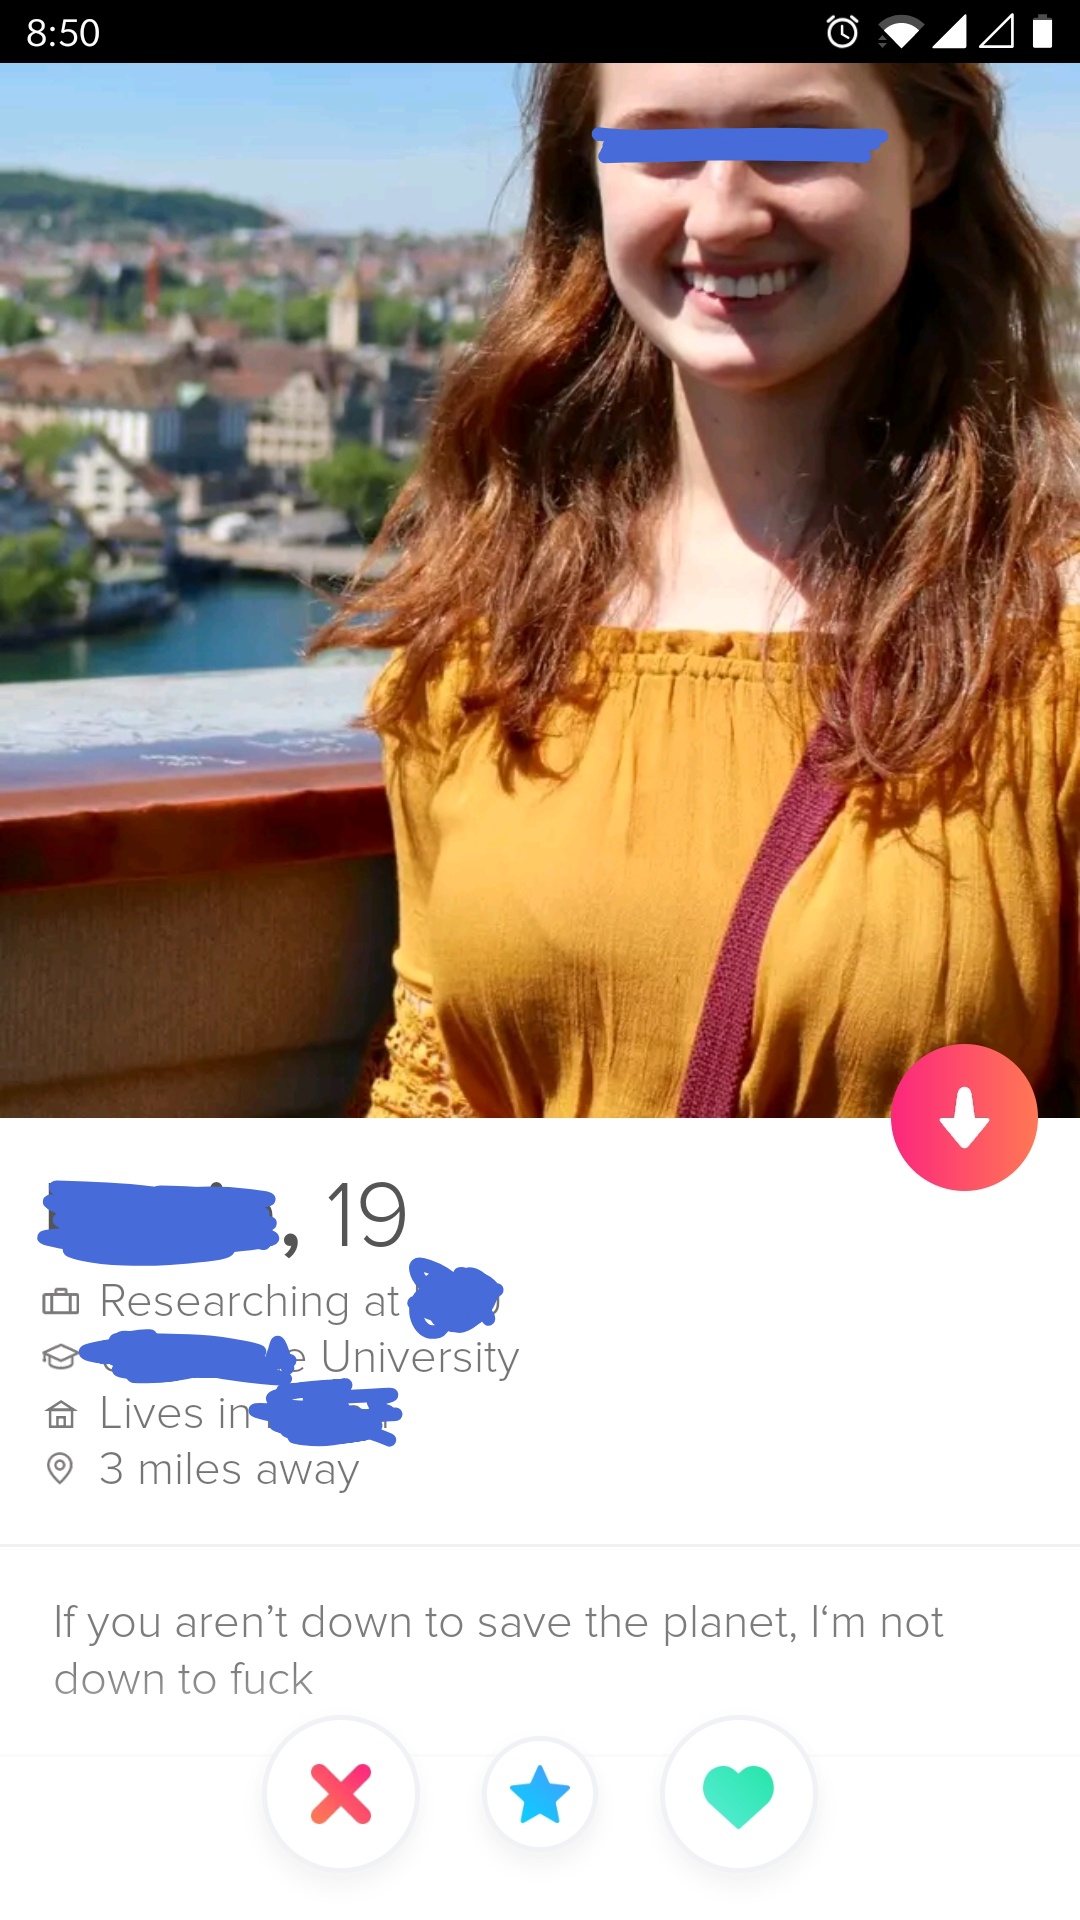 tinder - smile - 19 Researching at > University @ Lives in 3 miles away If you aren't down to save the planet, I'm not down to fuck